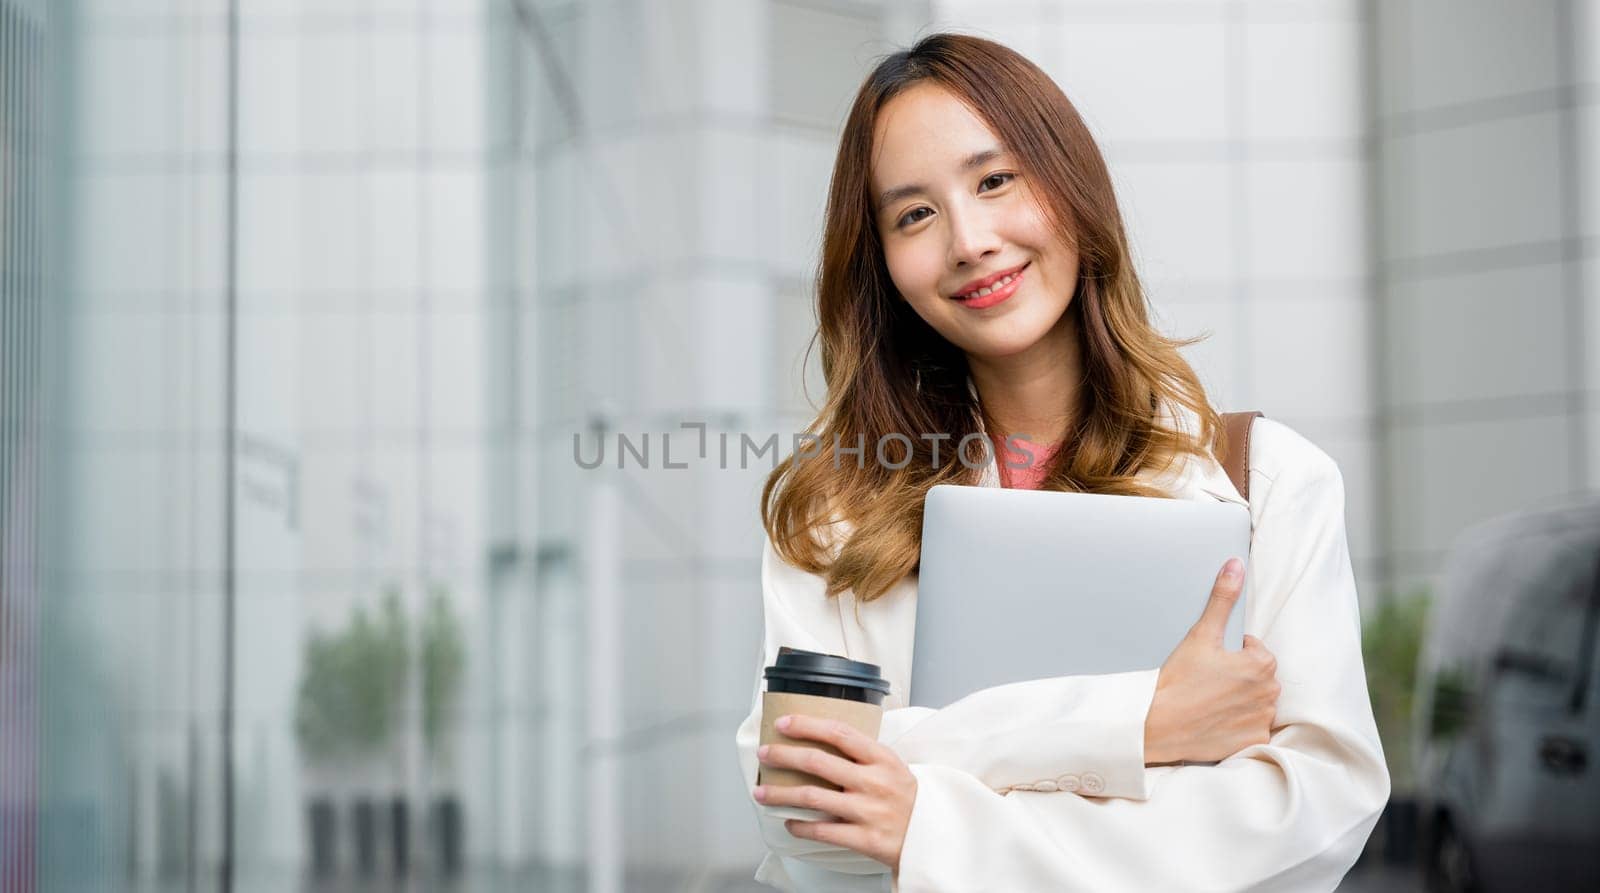 Smiling brunette girl walks down the street, carrying a paper cup of hot coffee and a laptop in her hands. city wall serves as a beautiful background for this portrait of productivity and multitasking